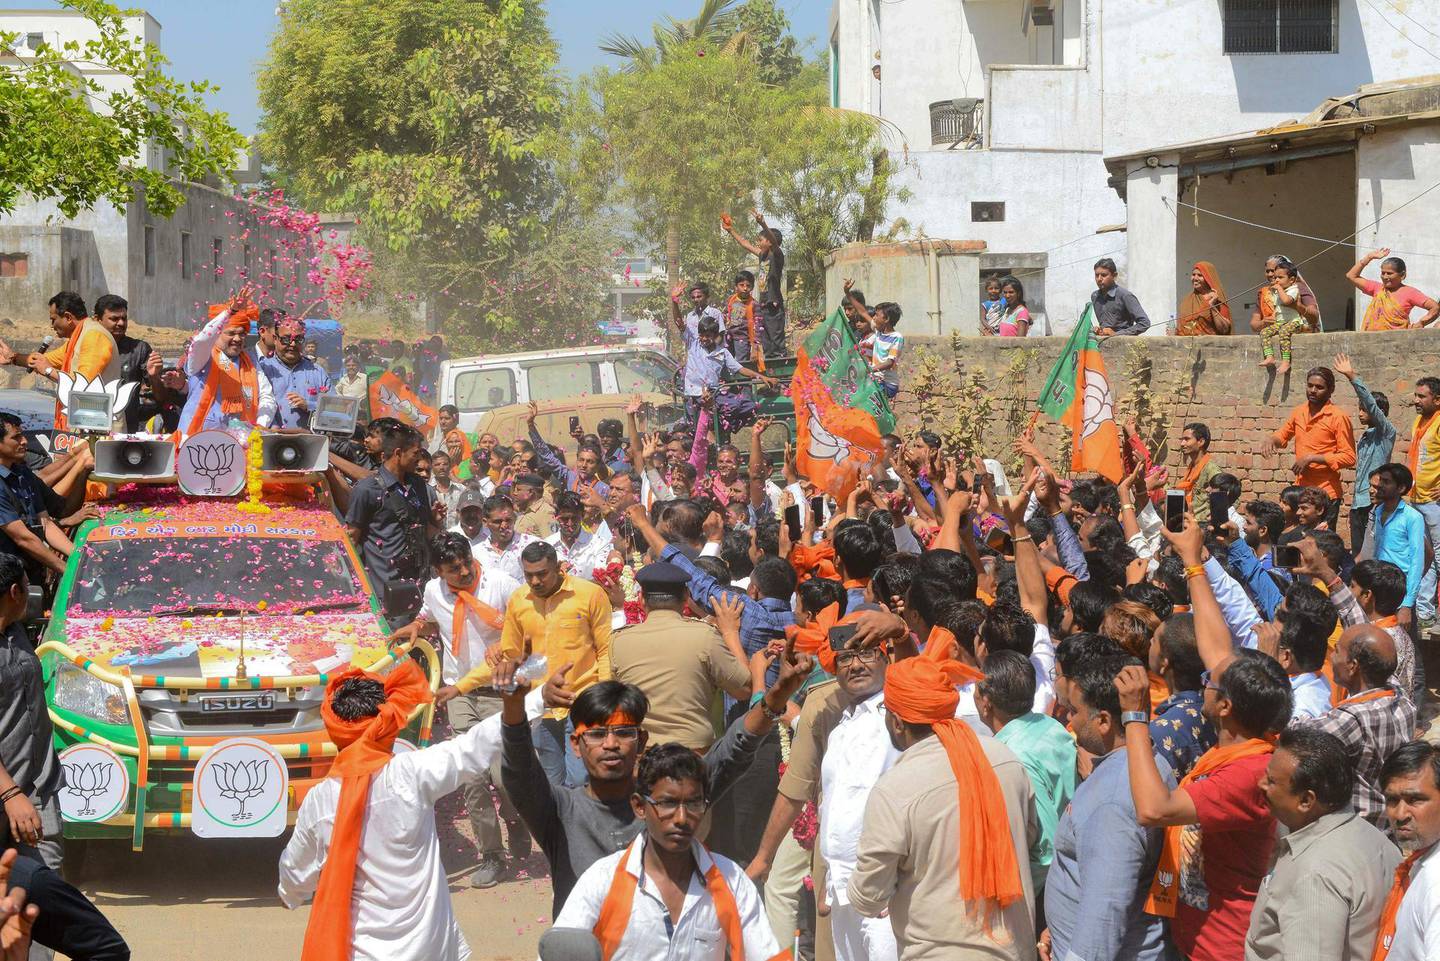 Indian Bharatiya Janata Party (BJP) National President, Amit Shah (L-C), throws floral garlands on the BJP supporters, during his road show in Ahmedabad on March 30, 2019. India is holding a general election to be held nearly six weeks starting on April 11, when hundreds of millions of voters will cast ballots in the world's biggest democracy. / AFP / SAM PANTHAKY
